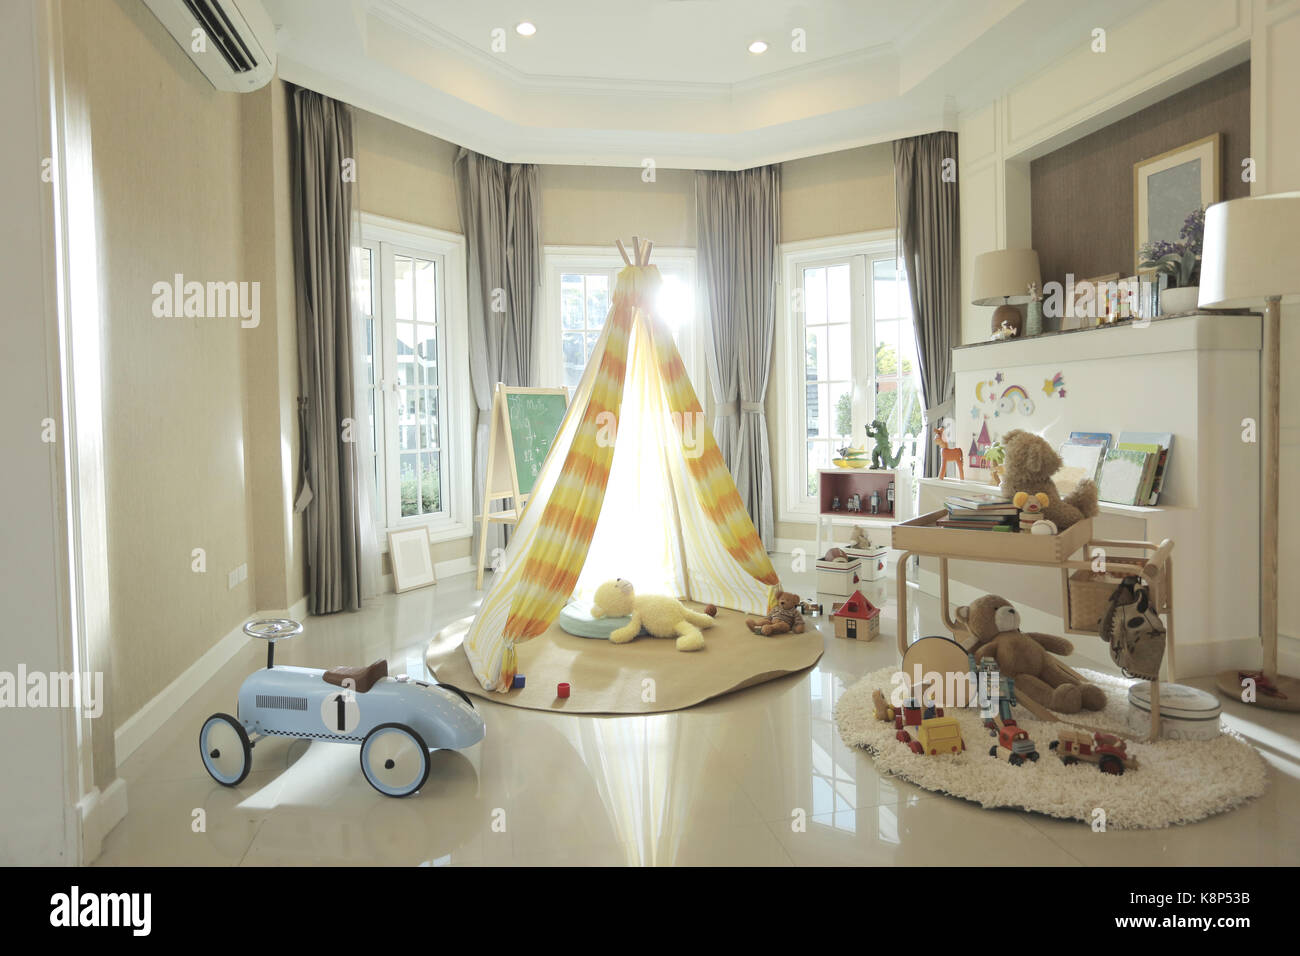 tent, dolls and alot of toys in the children room of happy home Stock Photo